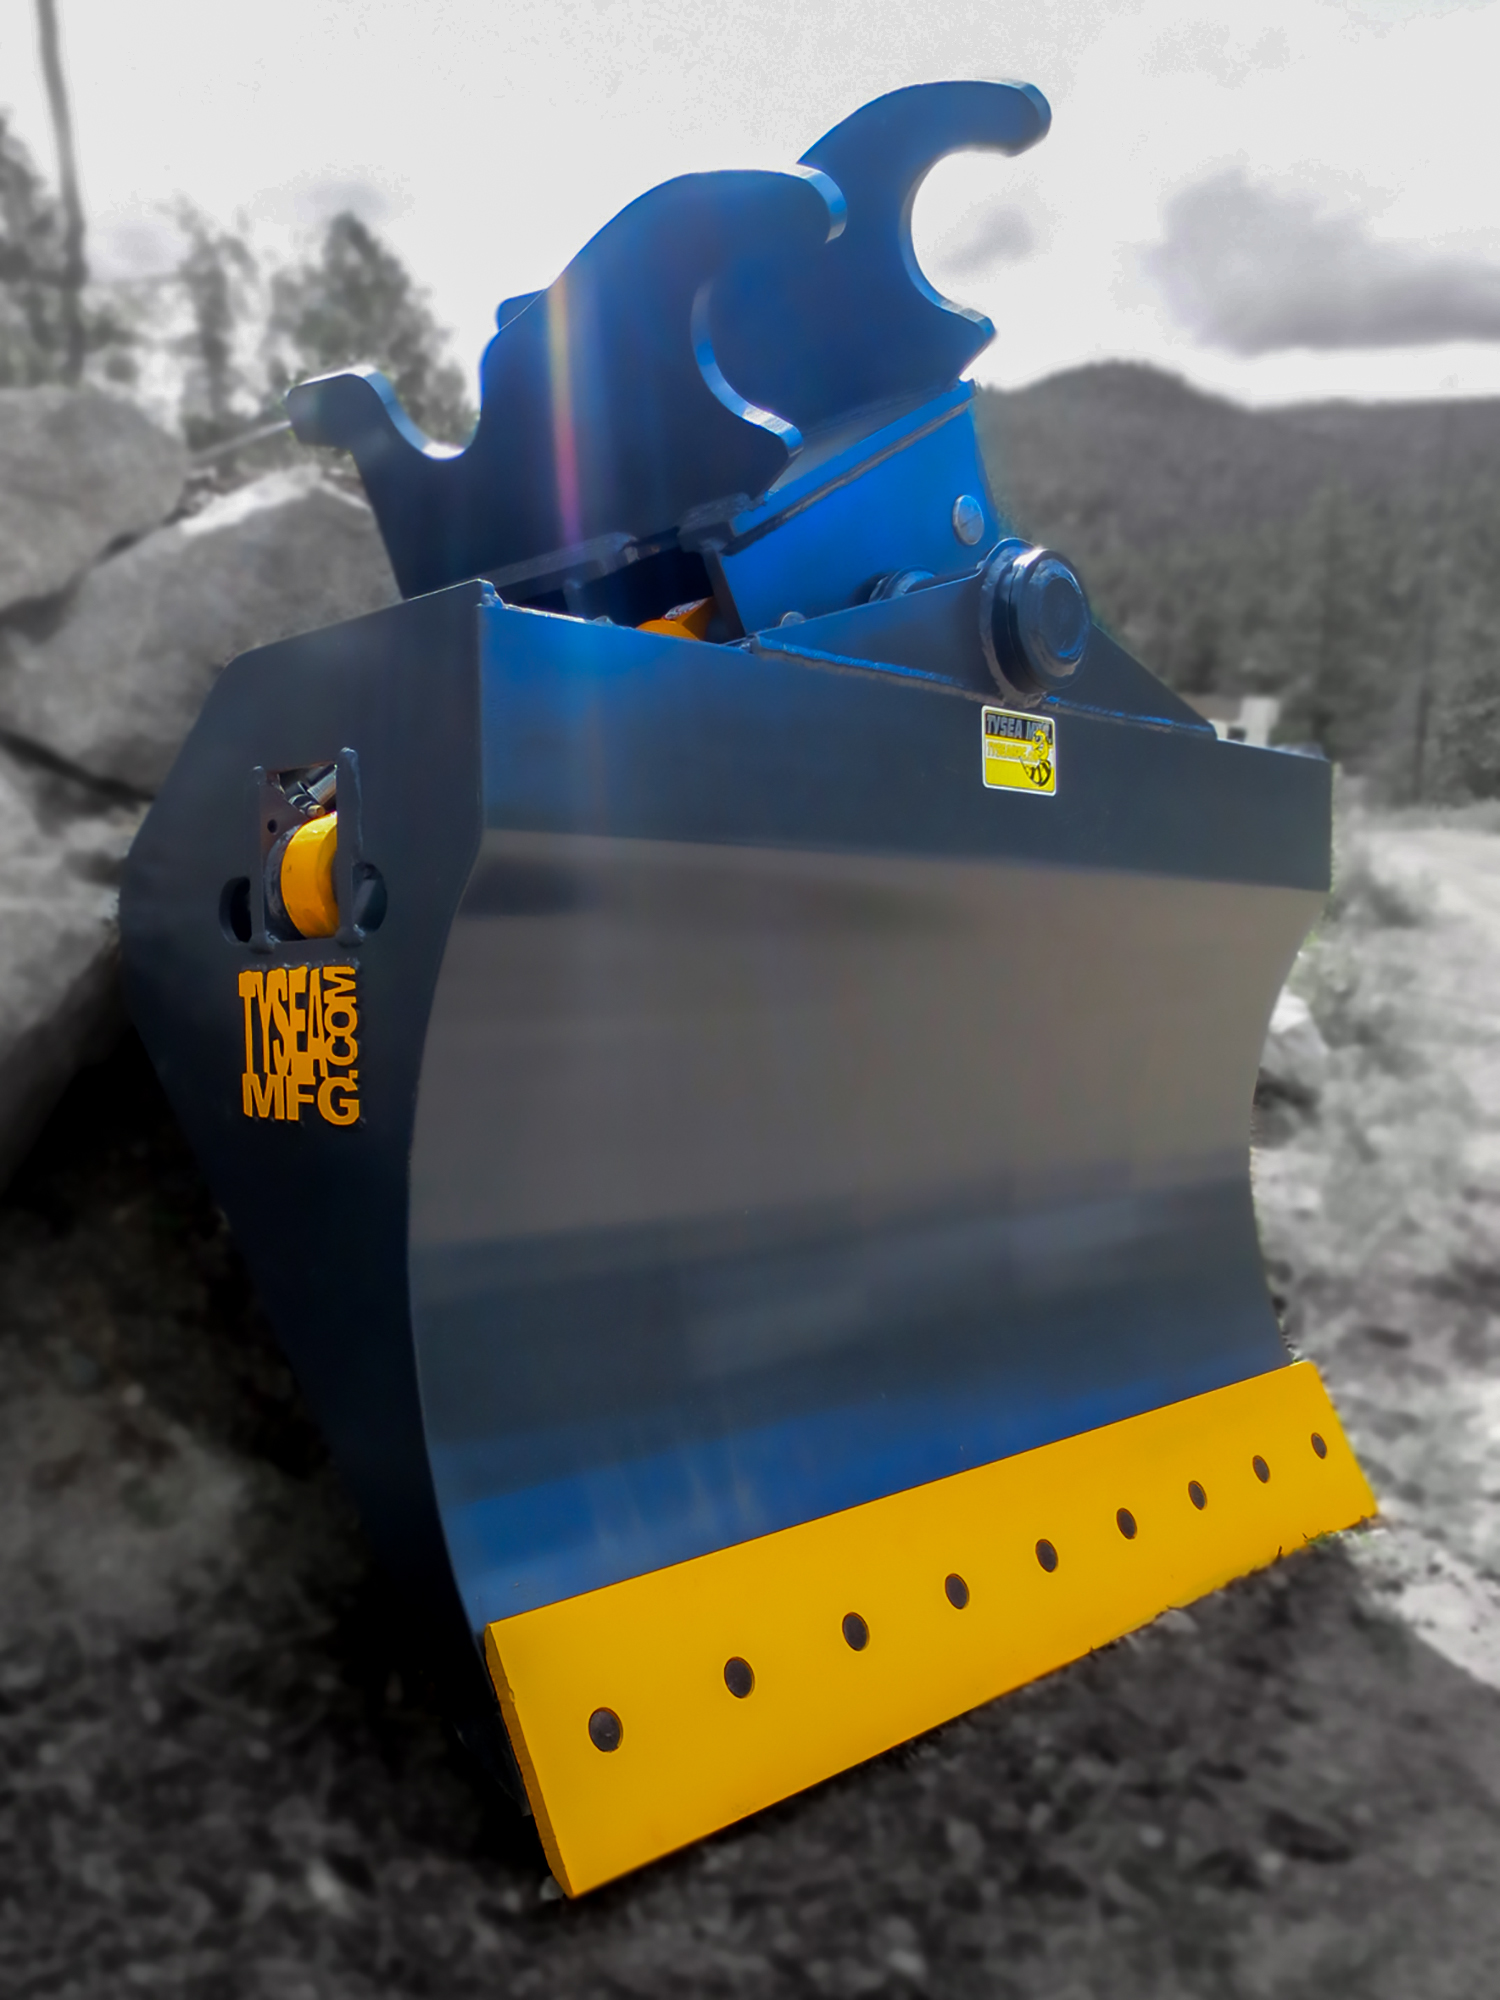 Grey and yellow excavator chuck blade, featuring smooth bolt on cutting edge and tilting design with dual hydraulic cylinders.